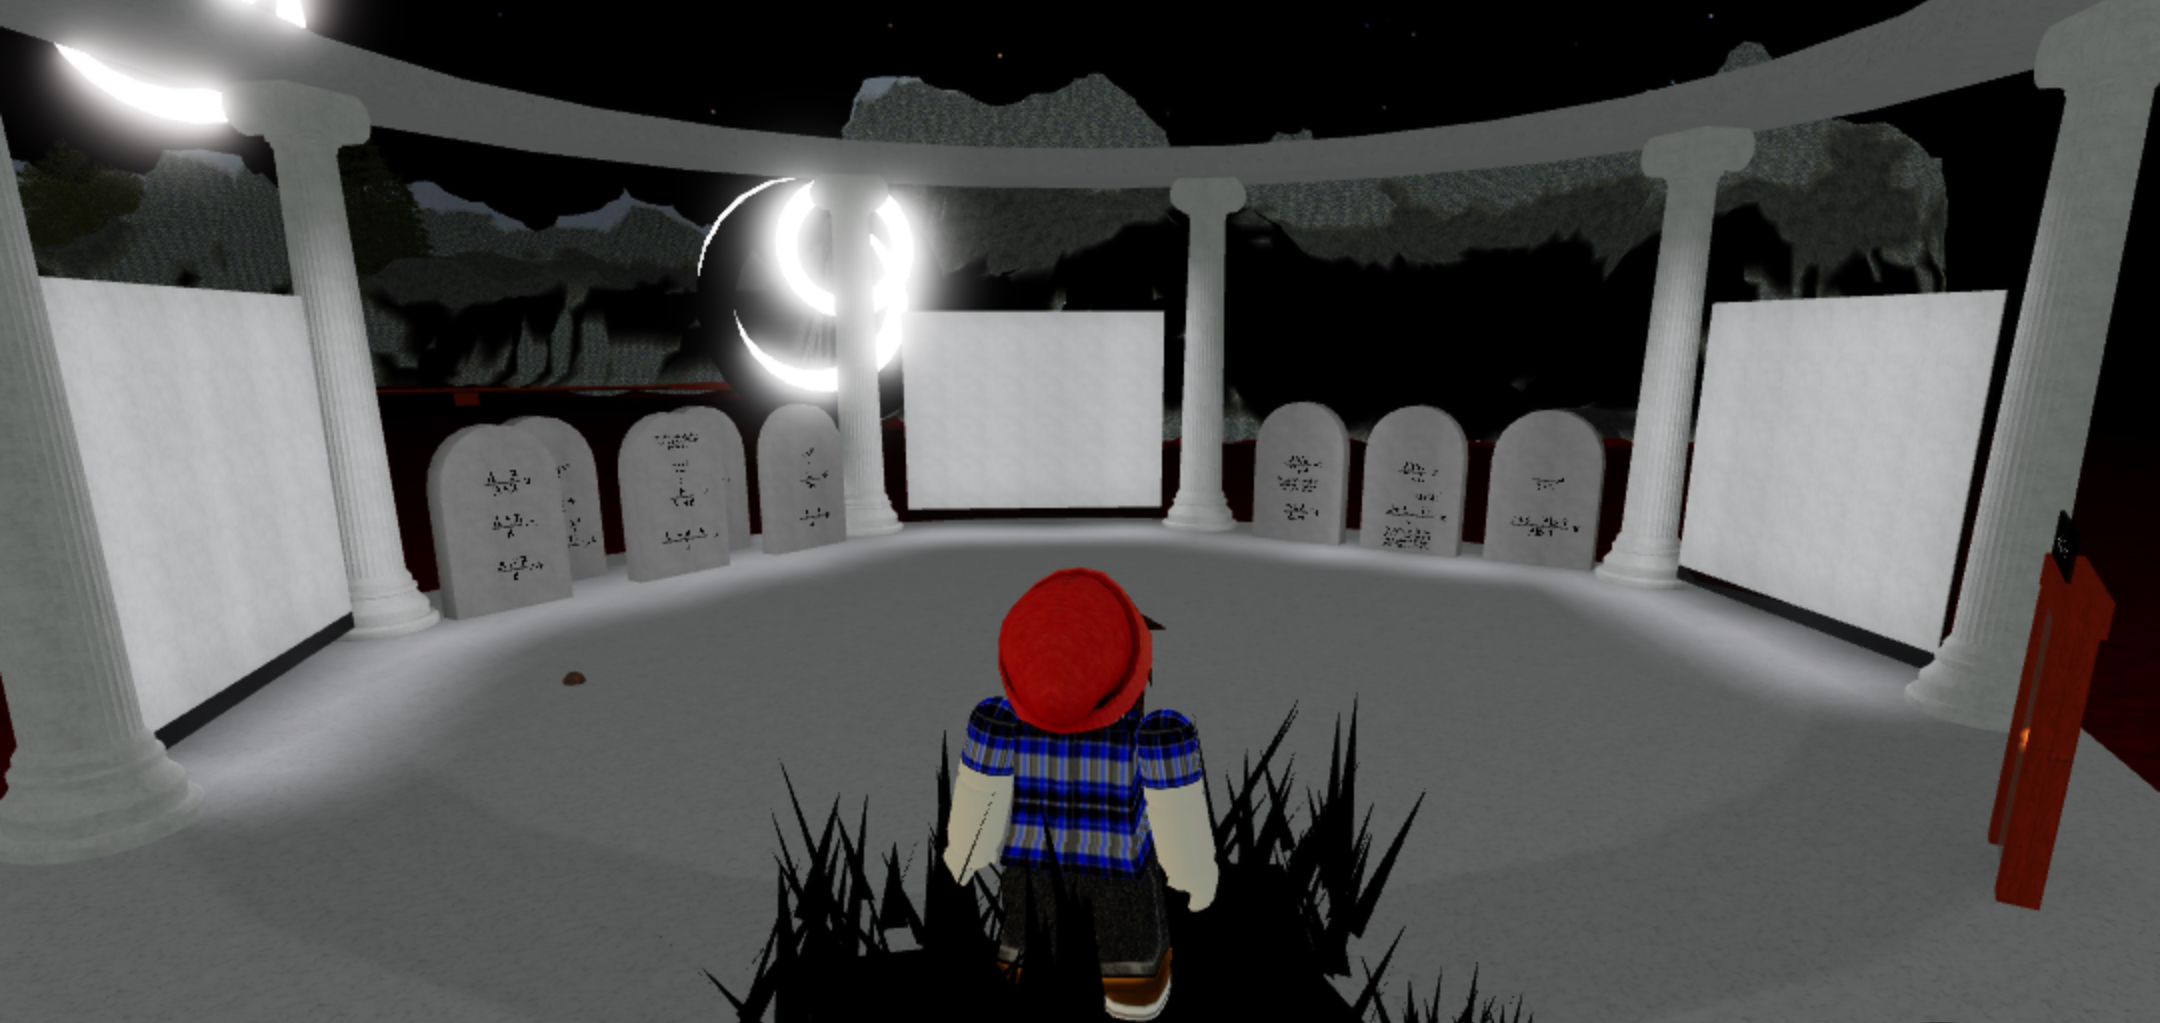 The Deprecation stage at metauni. Three whiteboards are arranged amongst tombstones with equations written on them, and decor resembling Ancient Greek architecture. There is some strange lighting effect, possibly a moon, and some mountainous terrain.